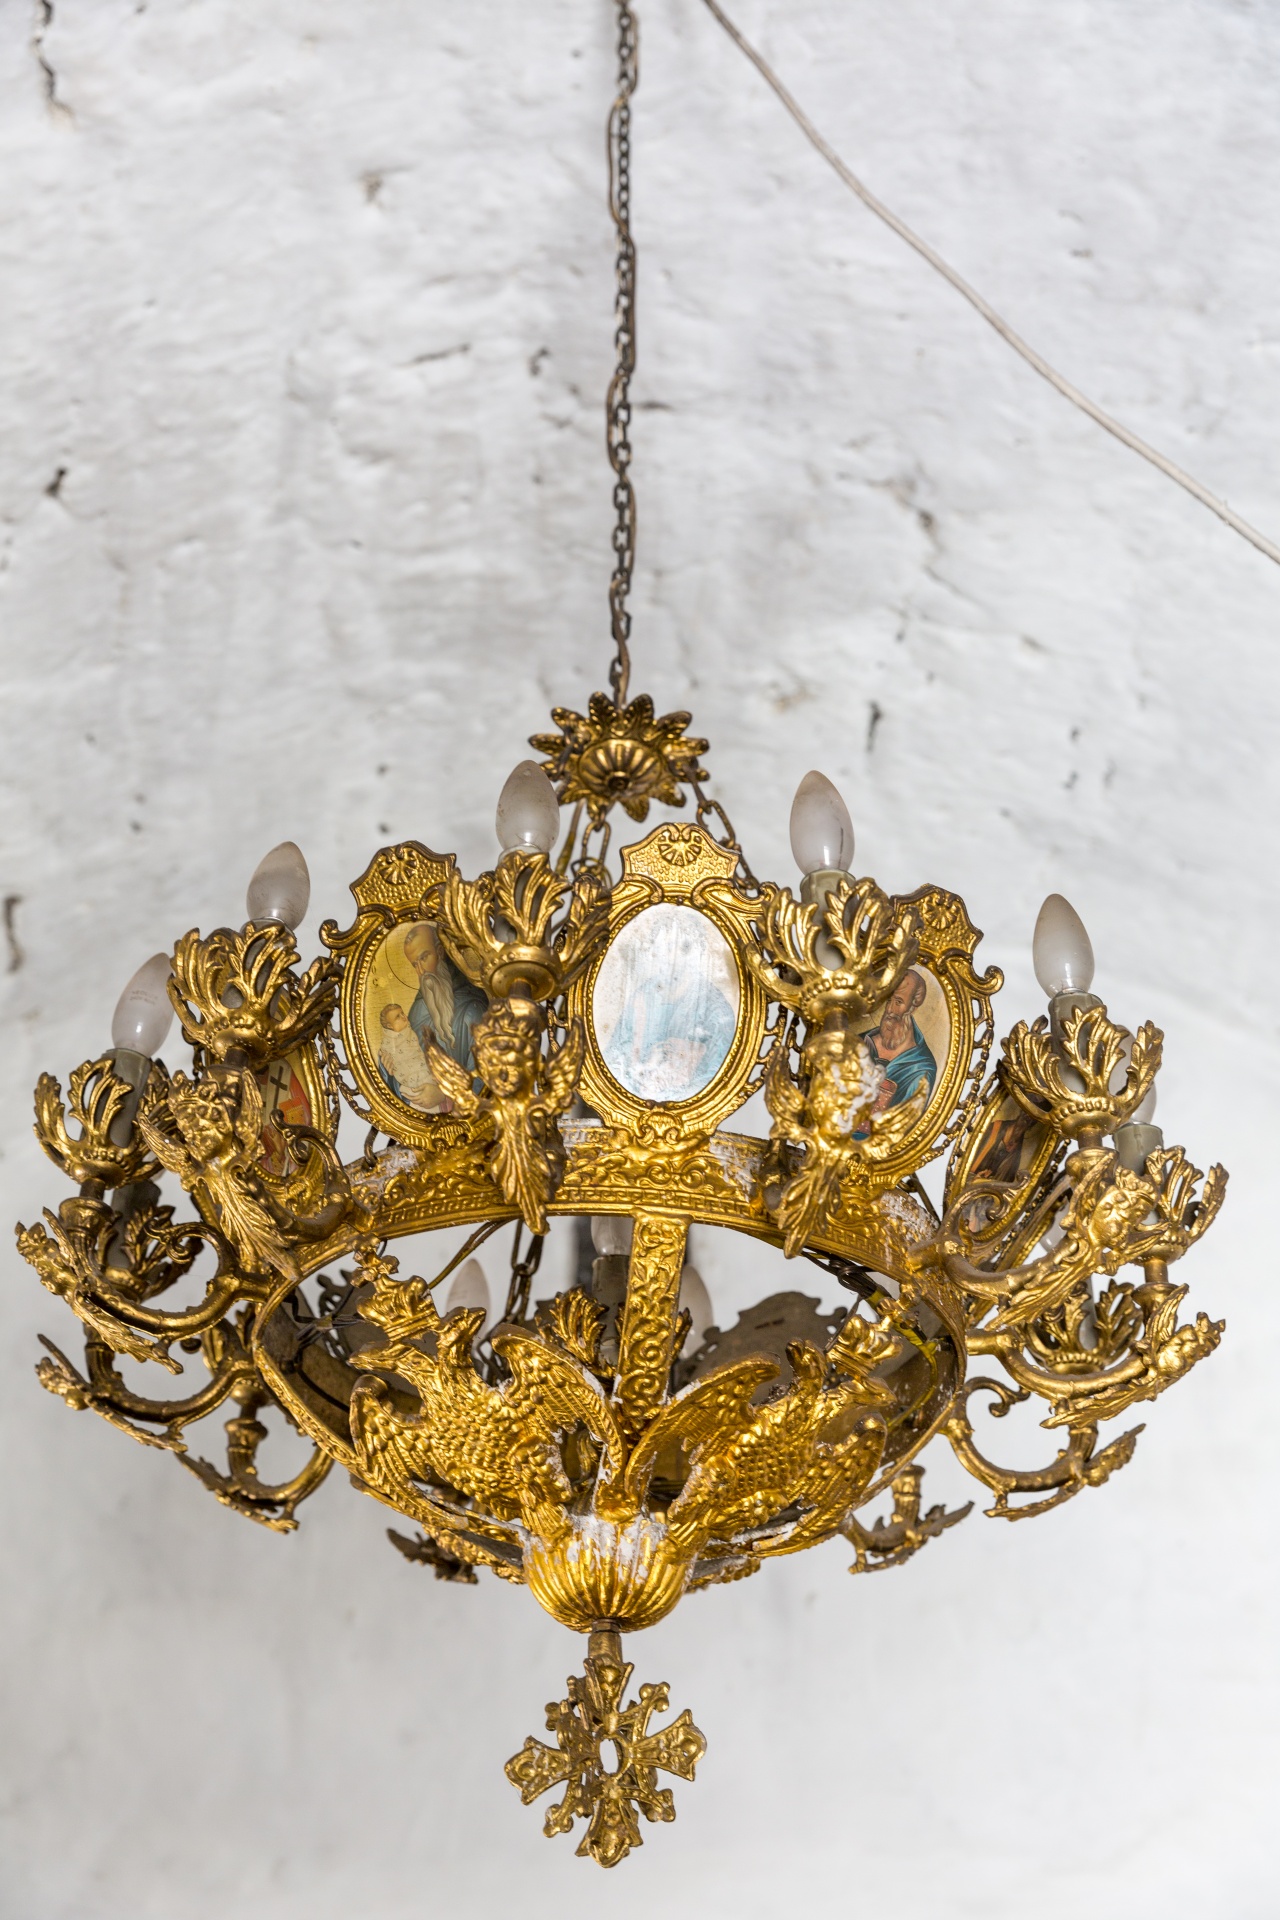 antique chandelier christianity free photo